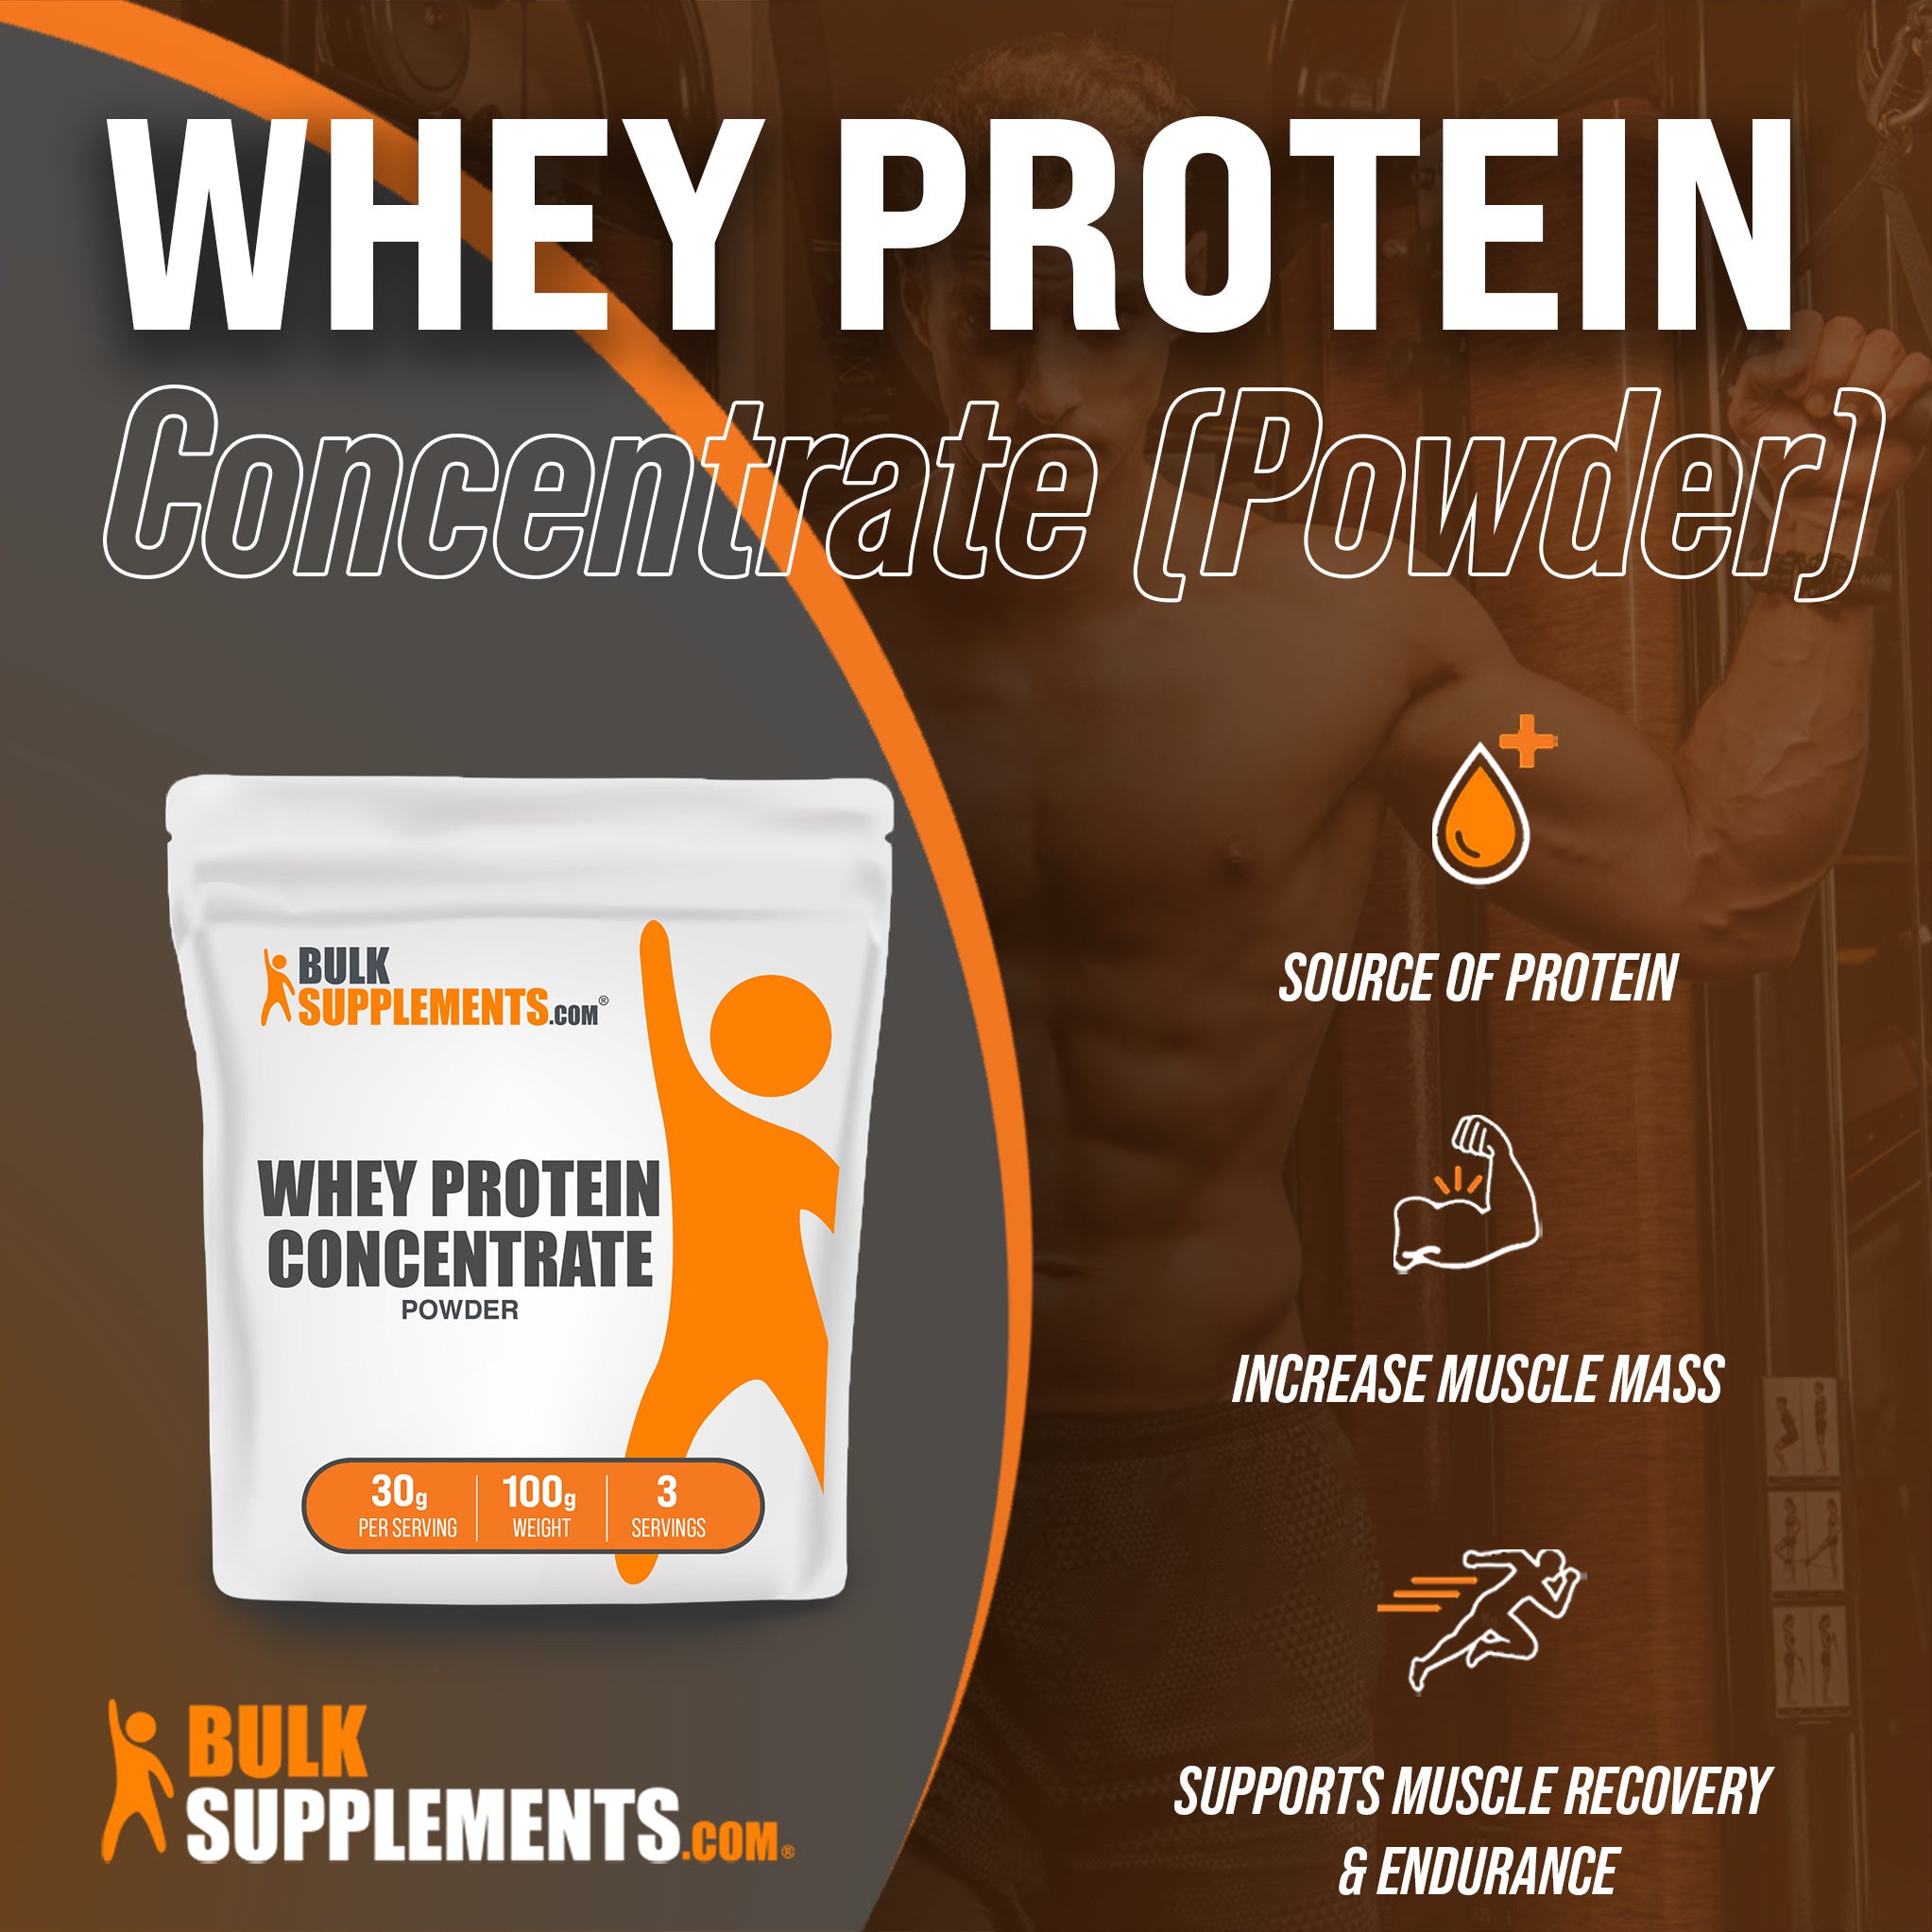 Benefits of Whey Protein Concentrate: source of protein, increase muscle mass, supports muscle recovery and endurance